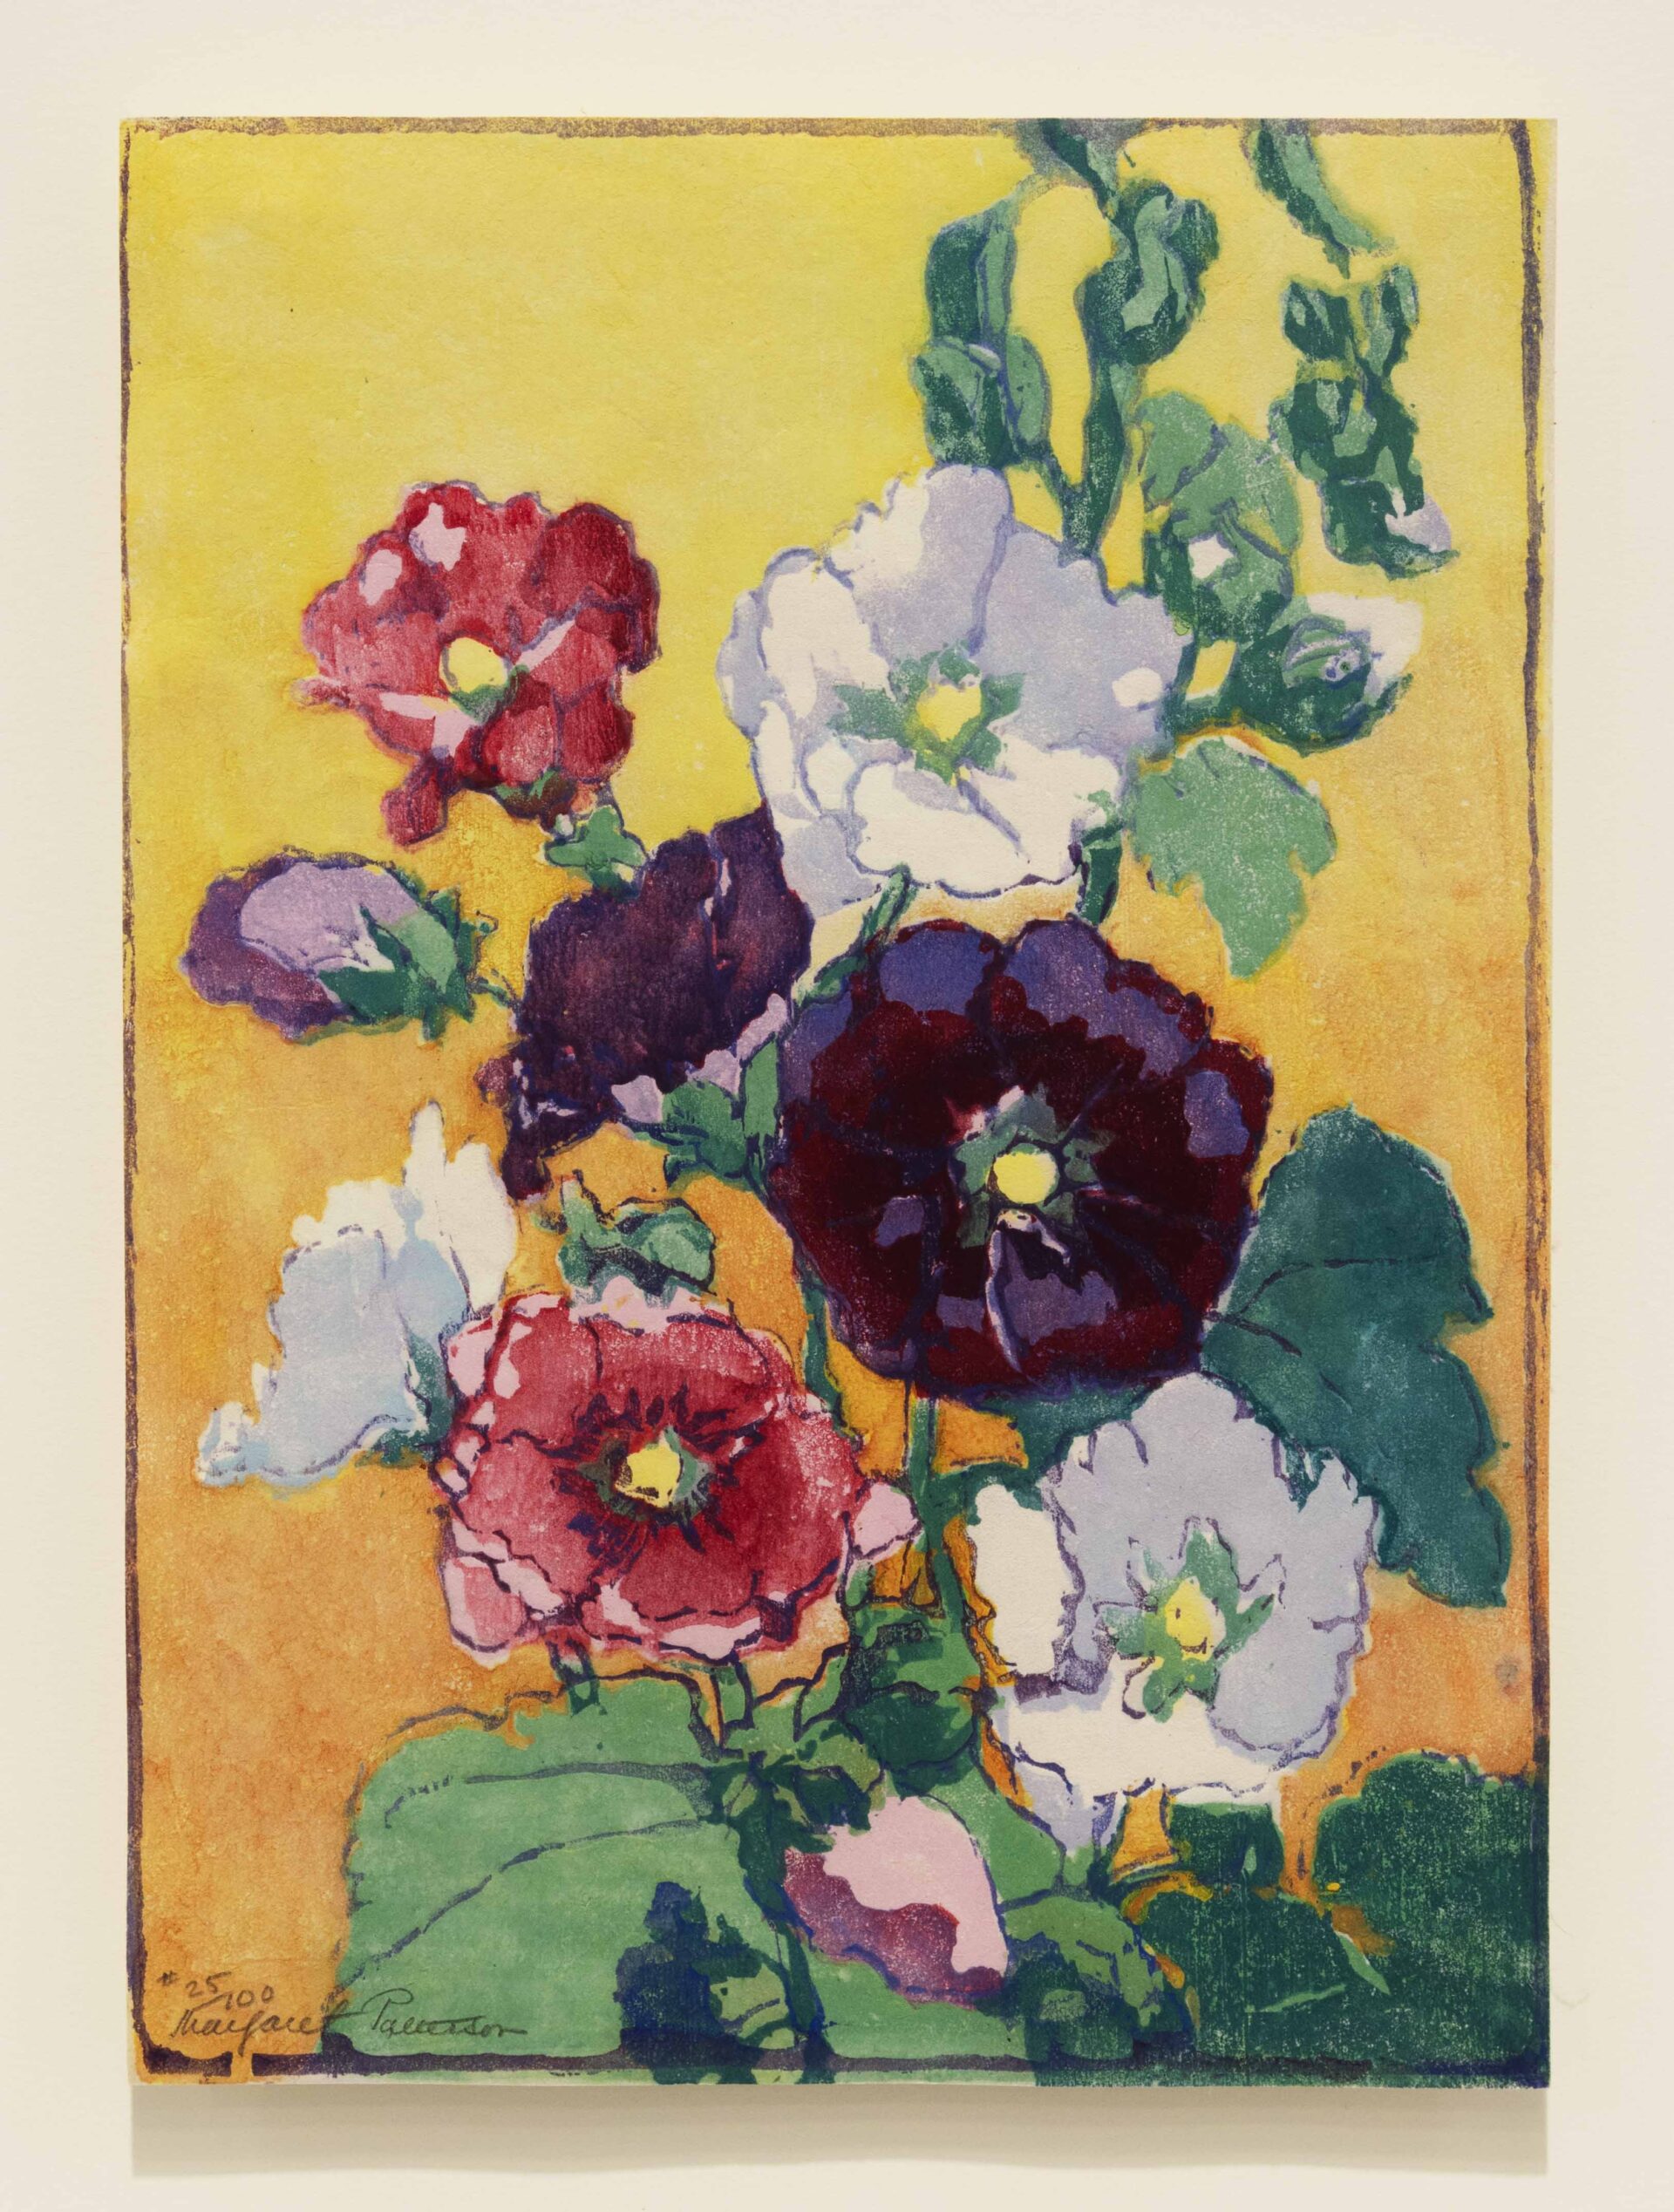 Margaret Patterson Hollyhocks (yellow-orange background), c. 1921-1950 Woodcut 10 1/2 x 8 1/2 inches (26.7 x 21.6 cm) Edition of 100